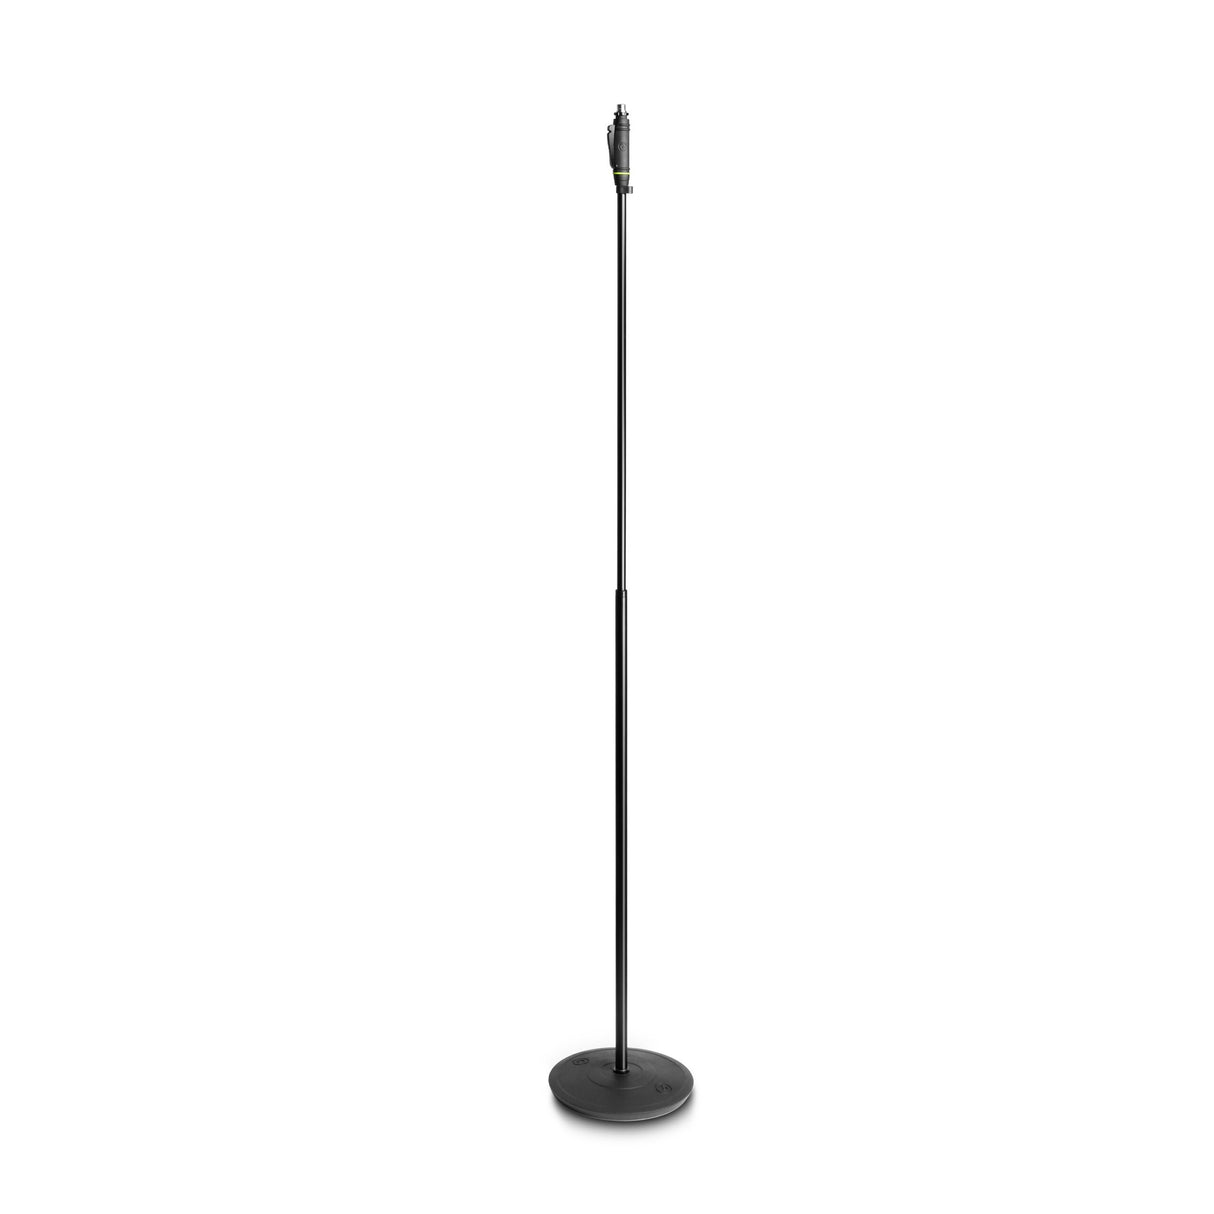 Gravity MS 231 HB Microphone Stand with Round Base and One-Hand Clutch